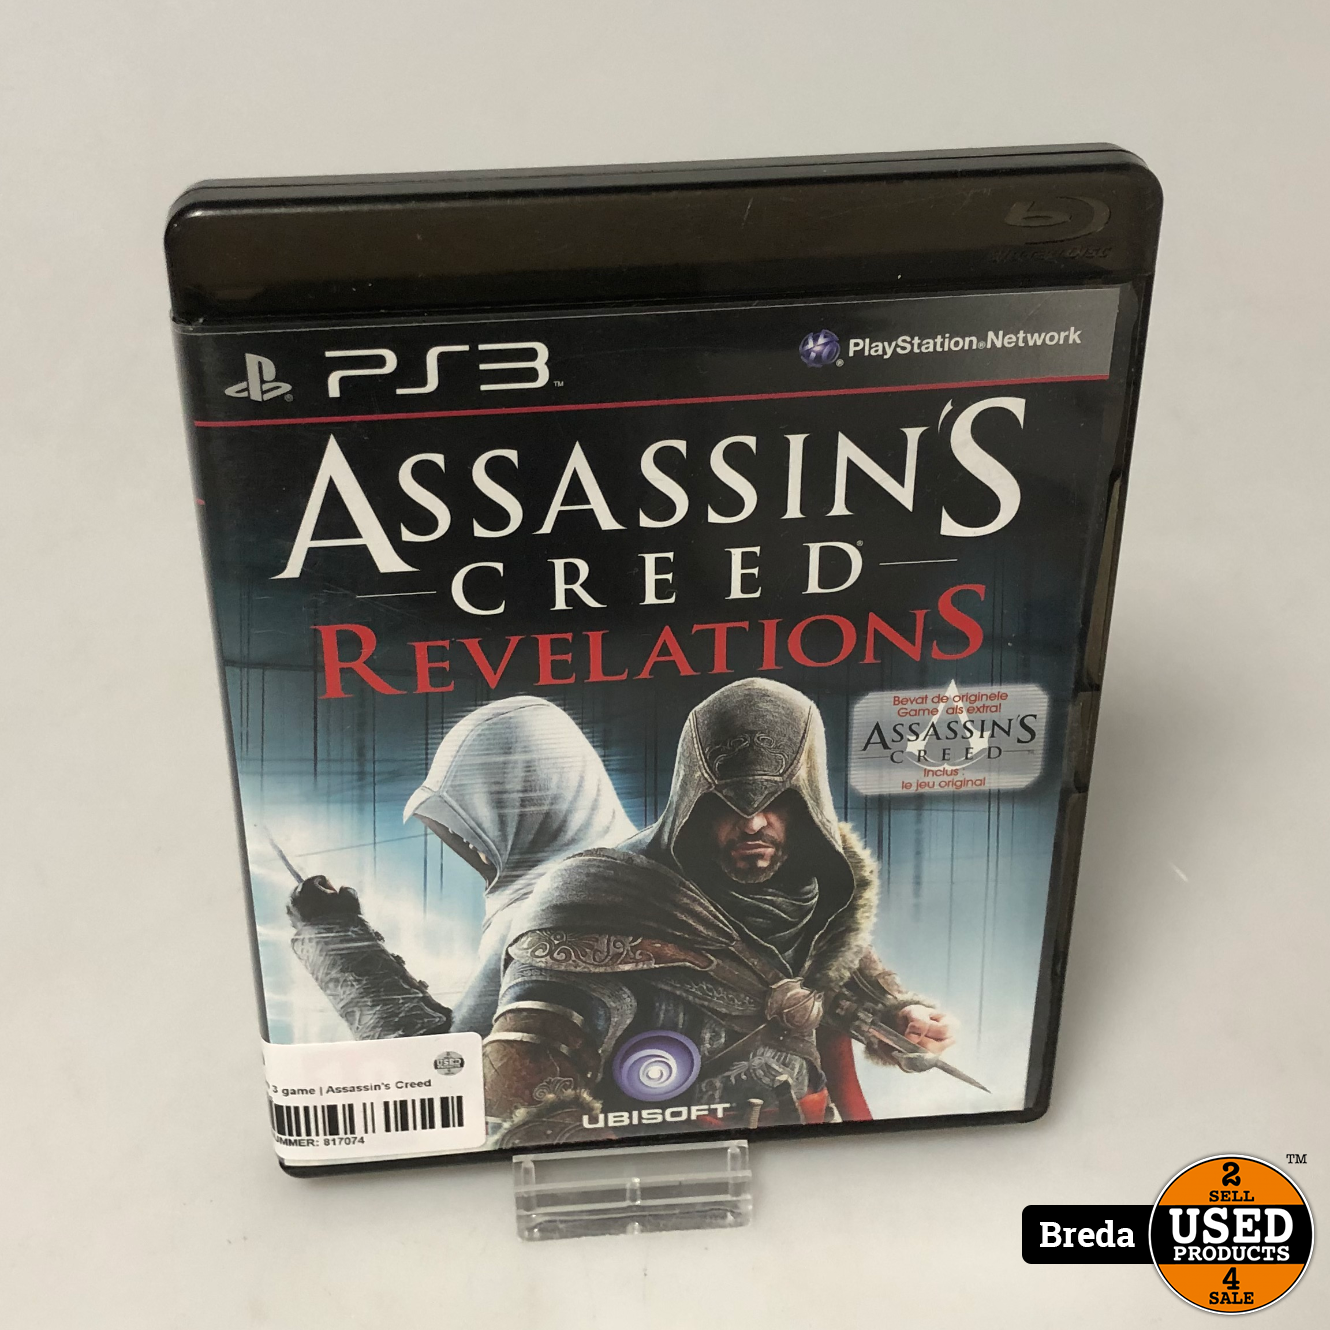 3 game | Assassin's Creed Revelations - Used Products Breda